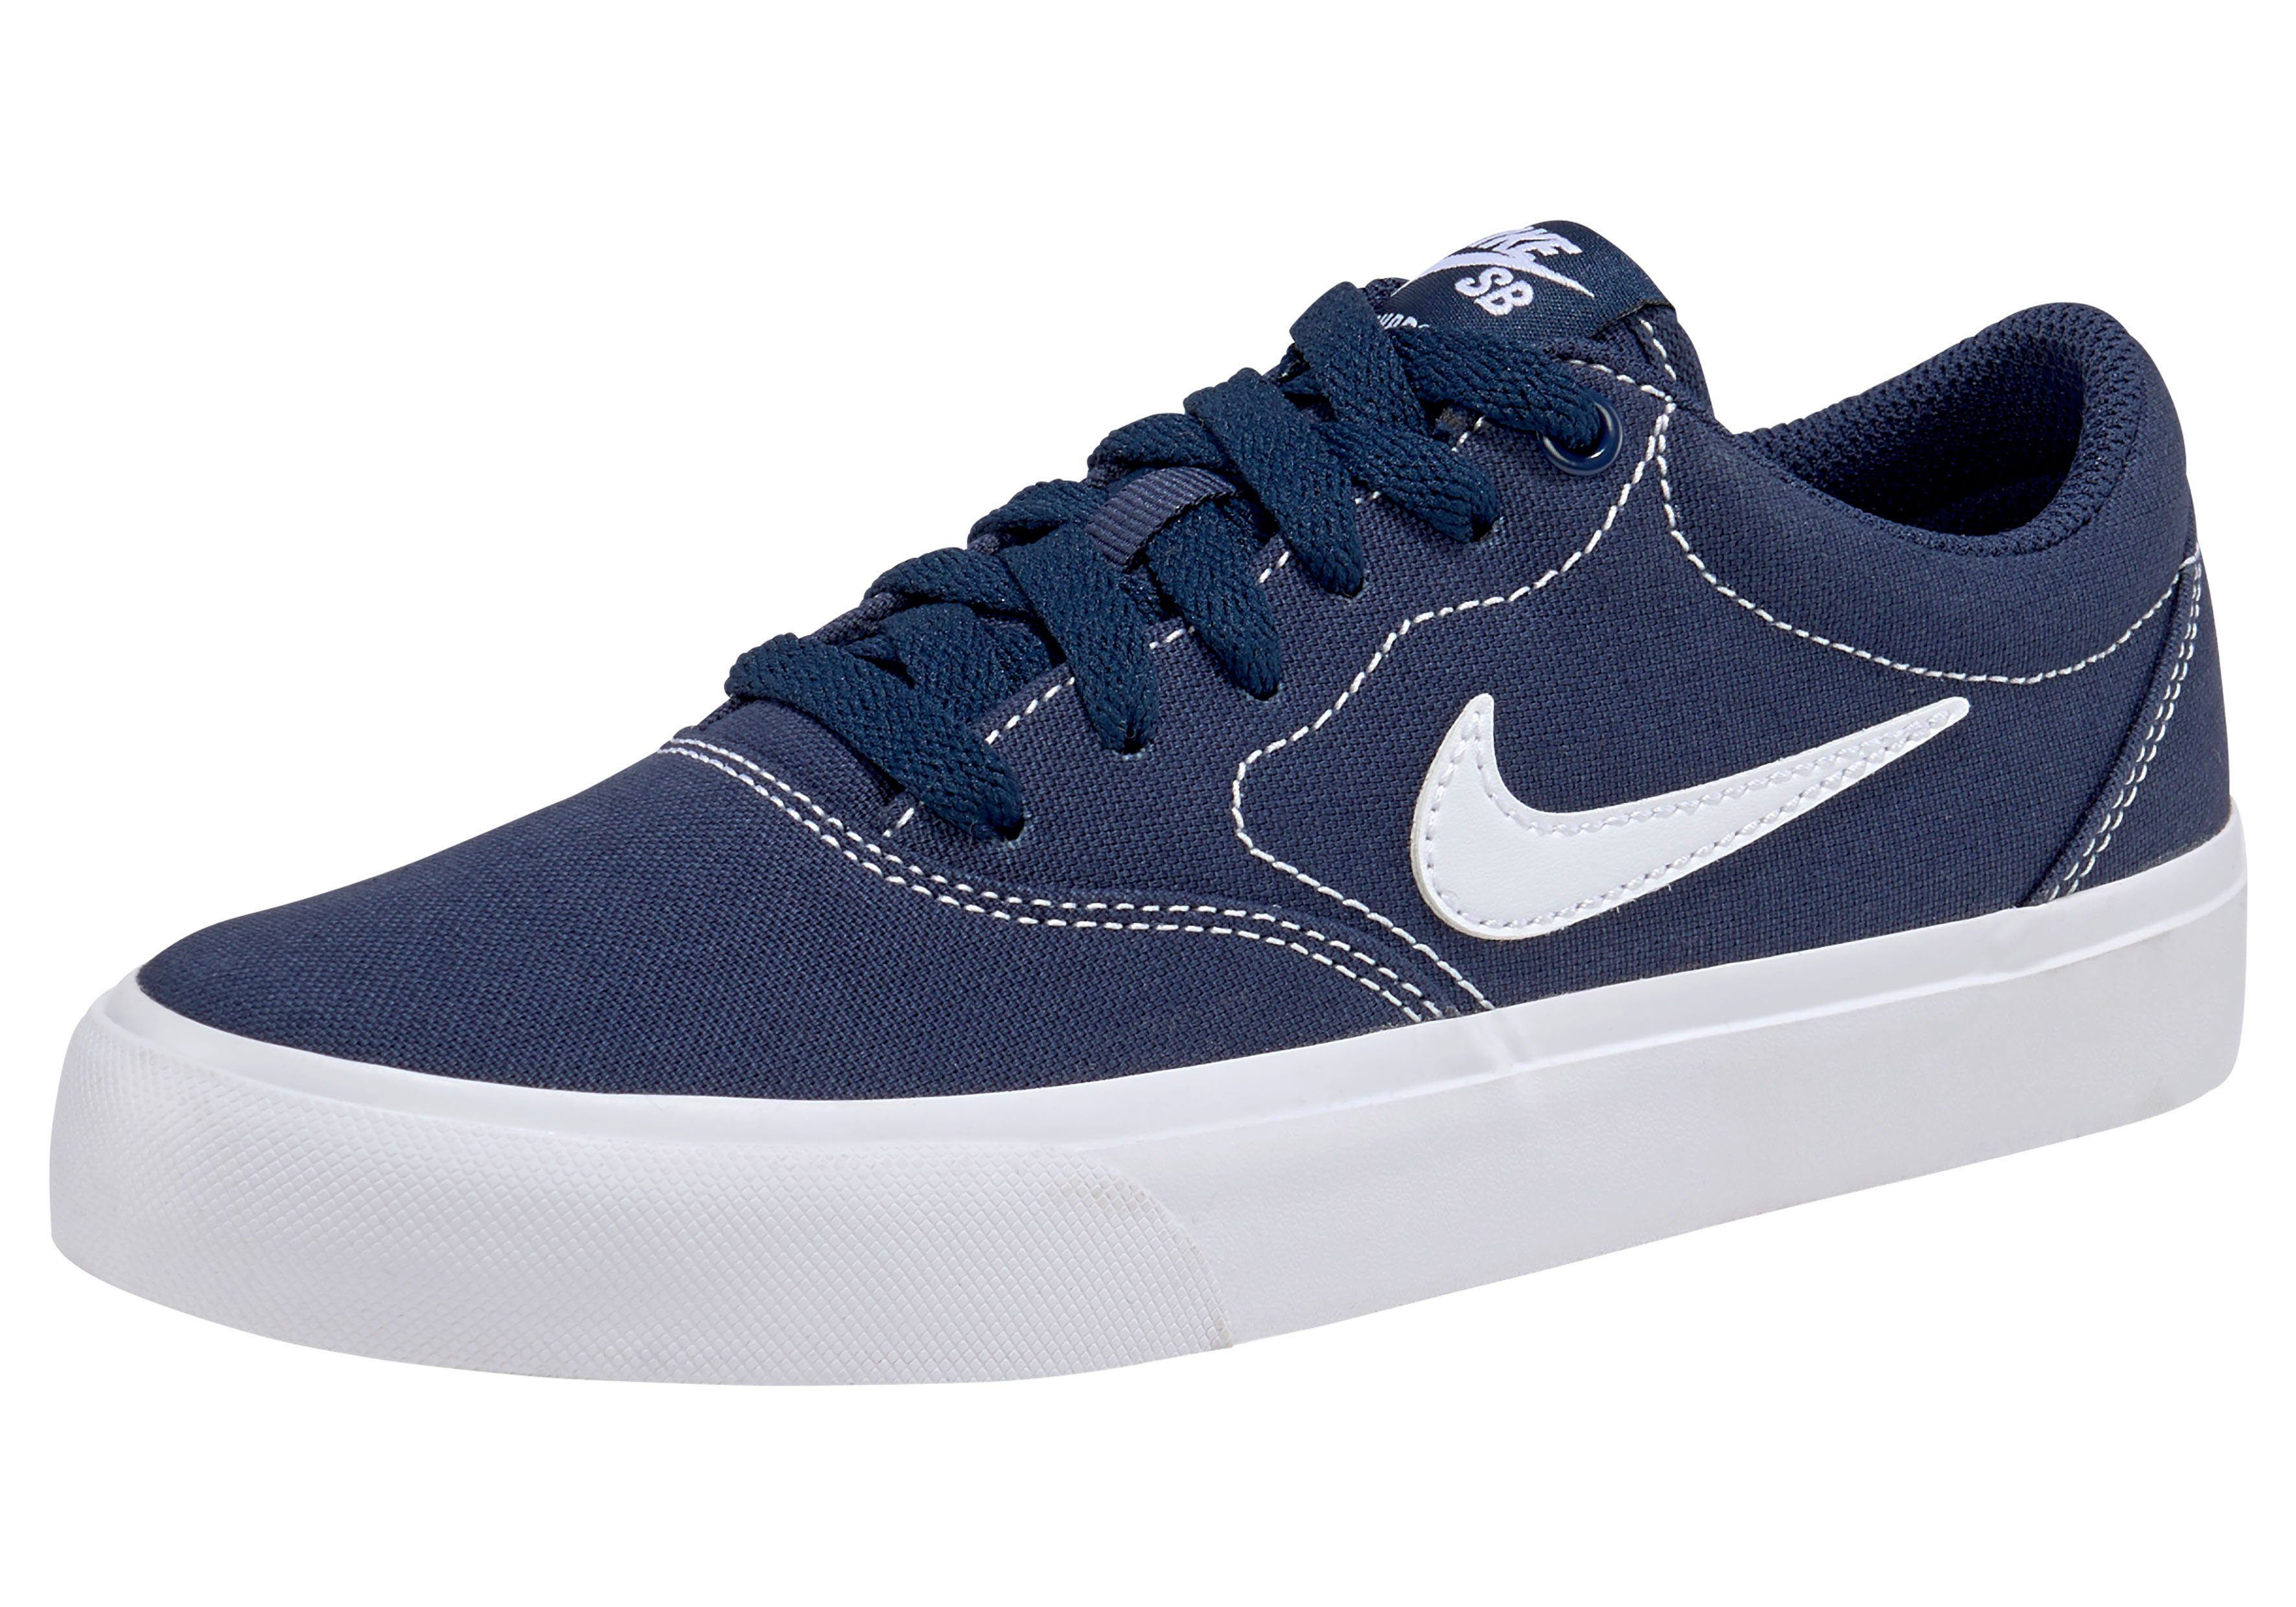 nike sb charge canvas navy